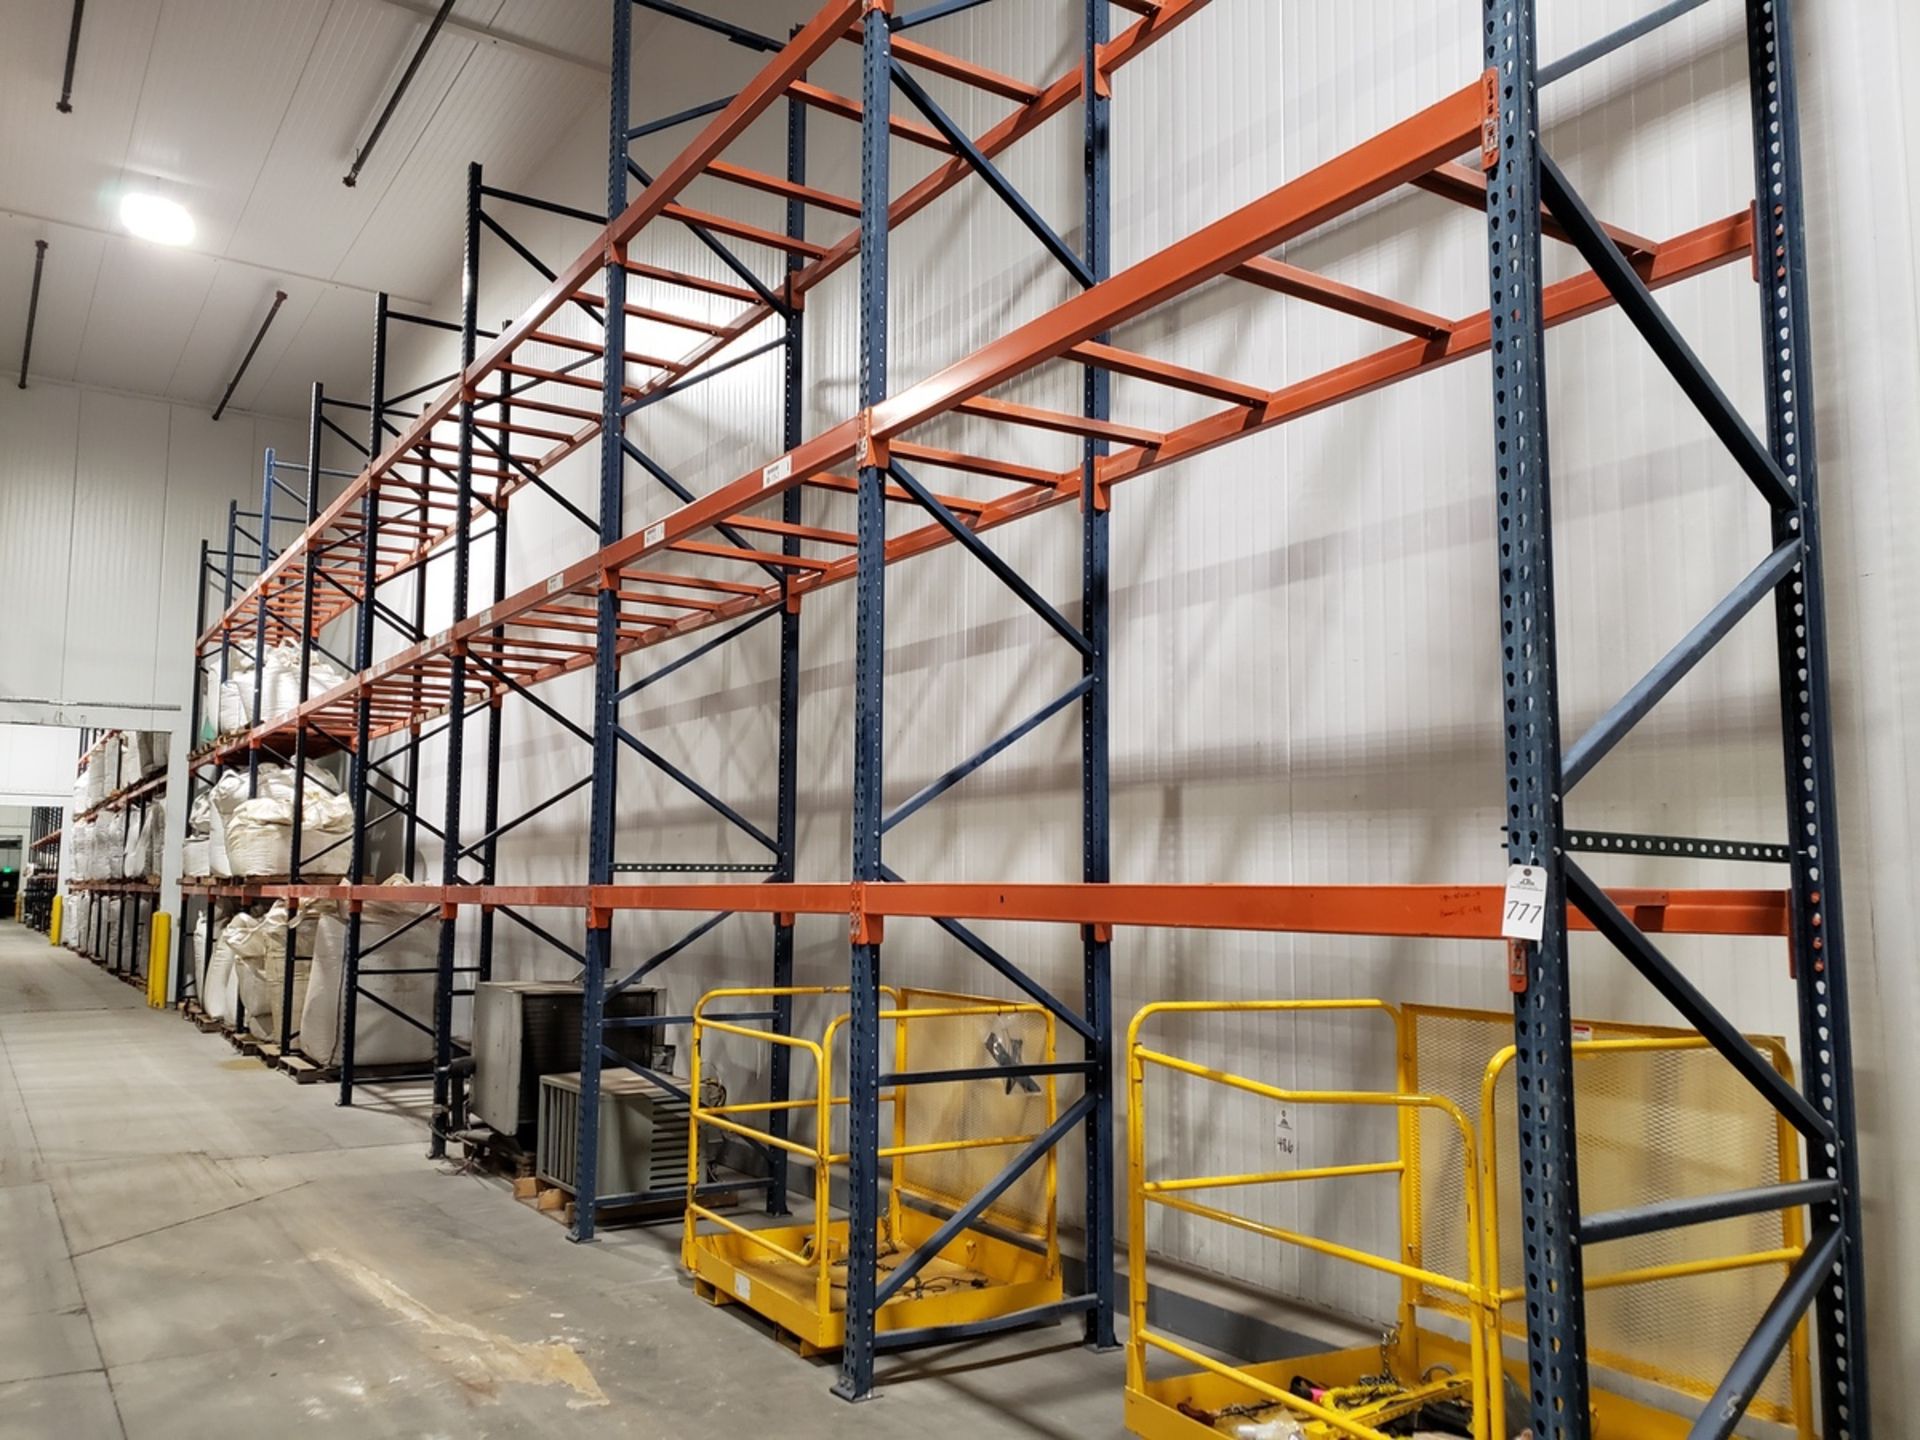 Lot of Pallet Racking, (9) Uprights, 42" x 20', (48) 8' Beams | Rig Fee $900